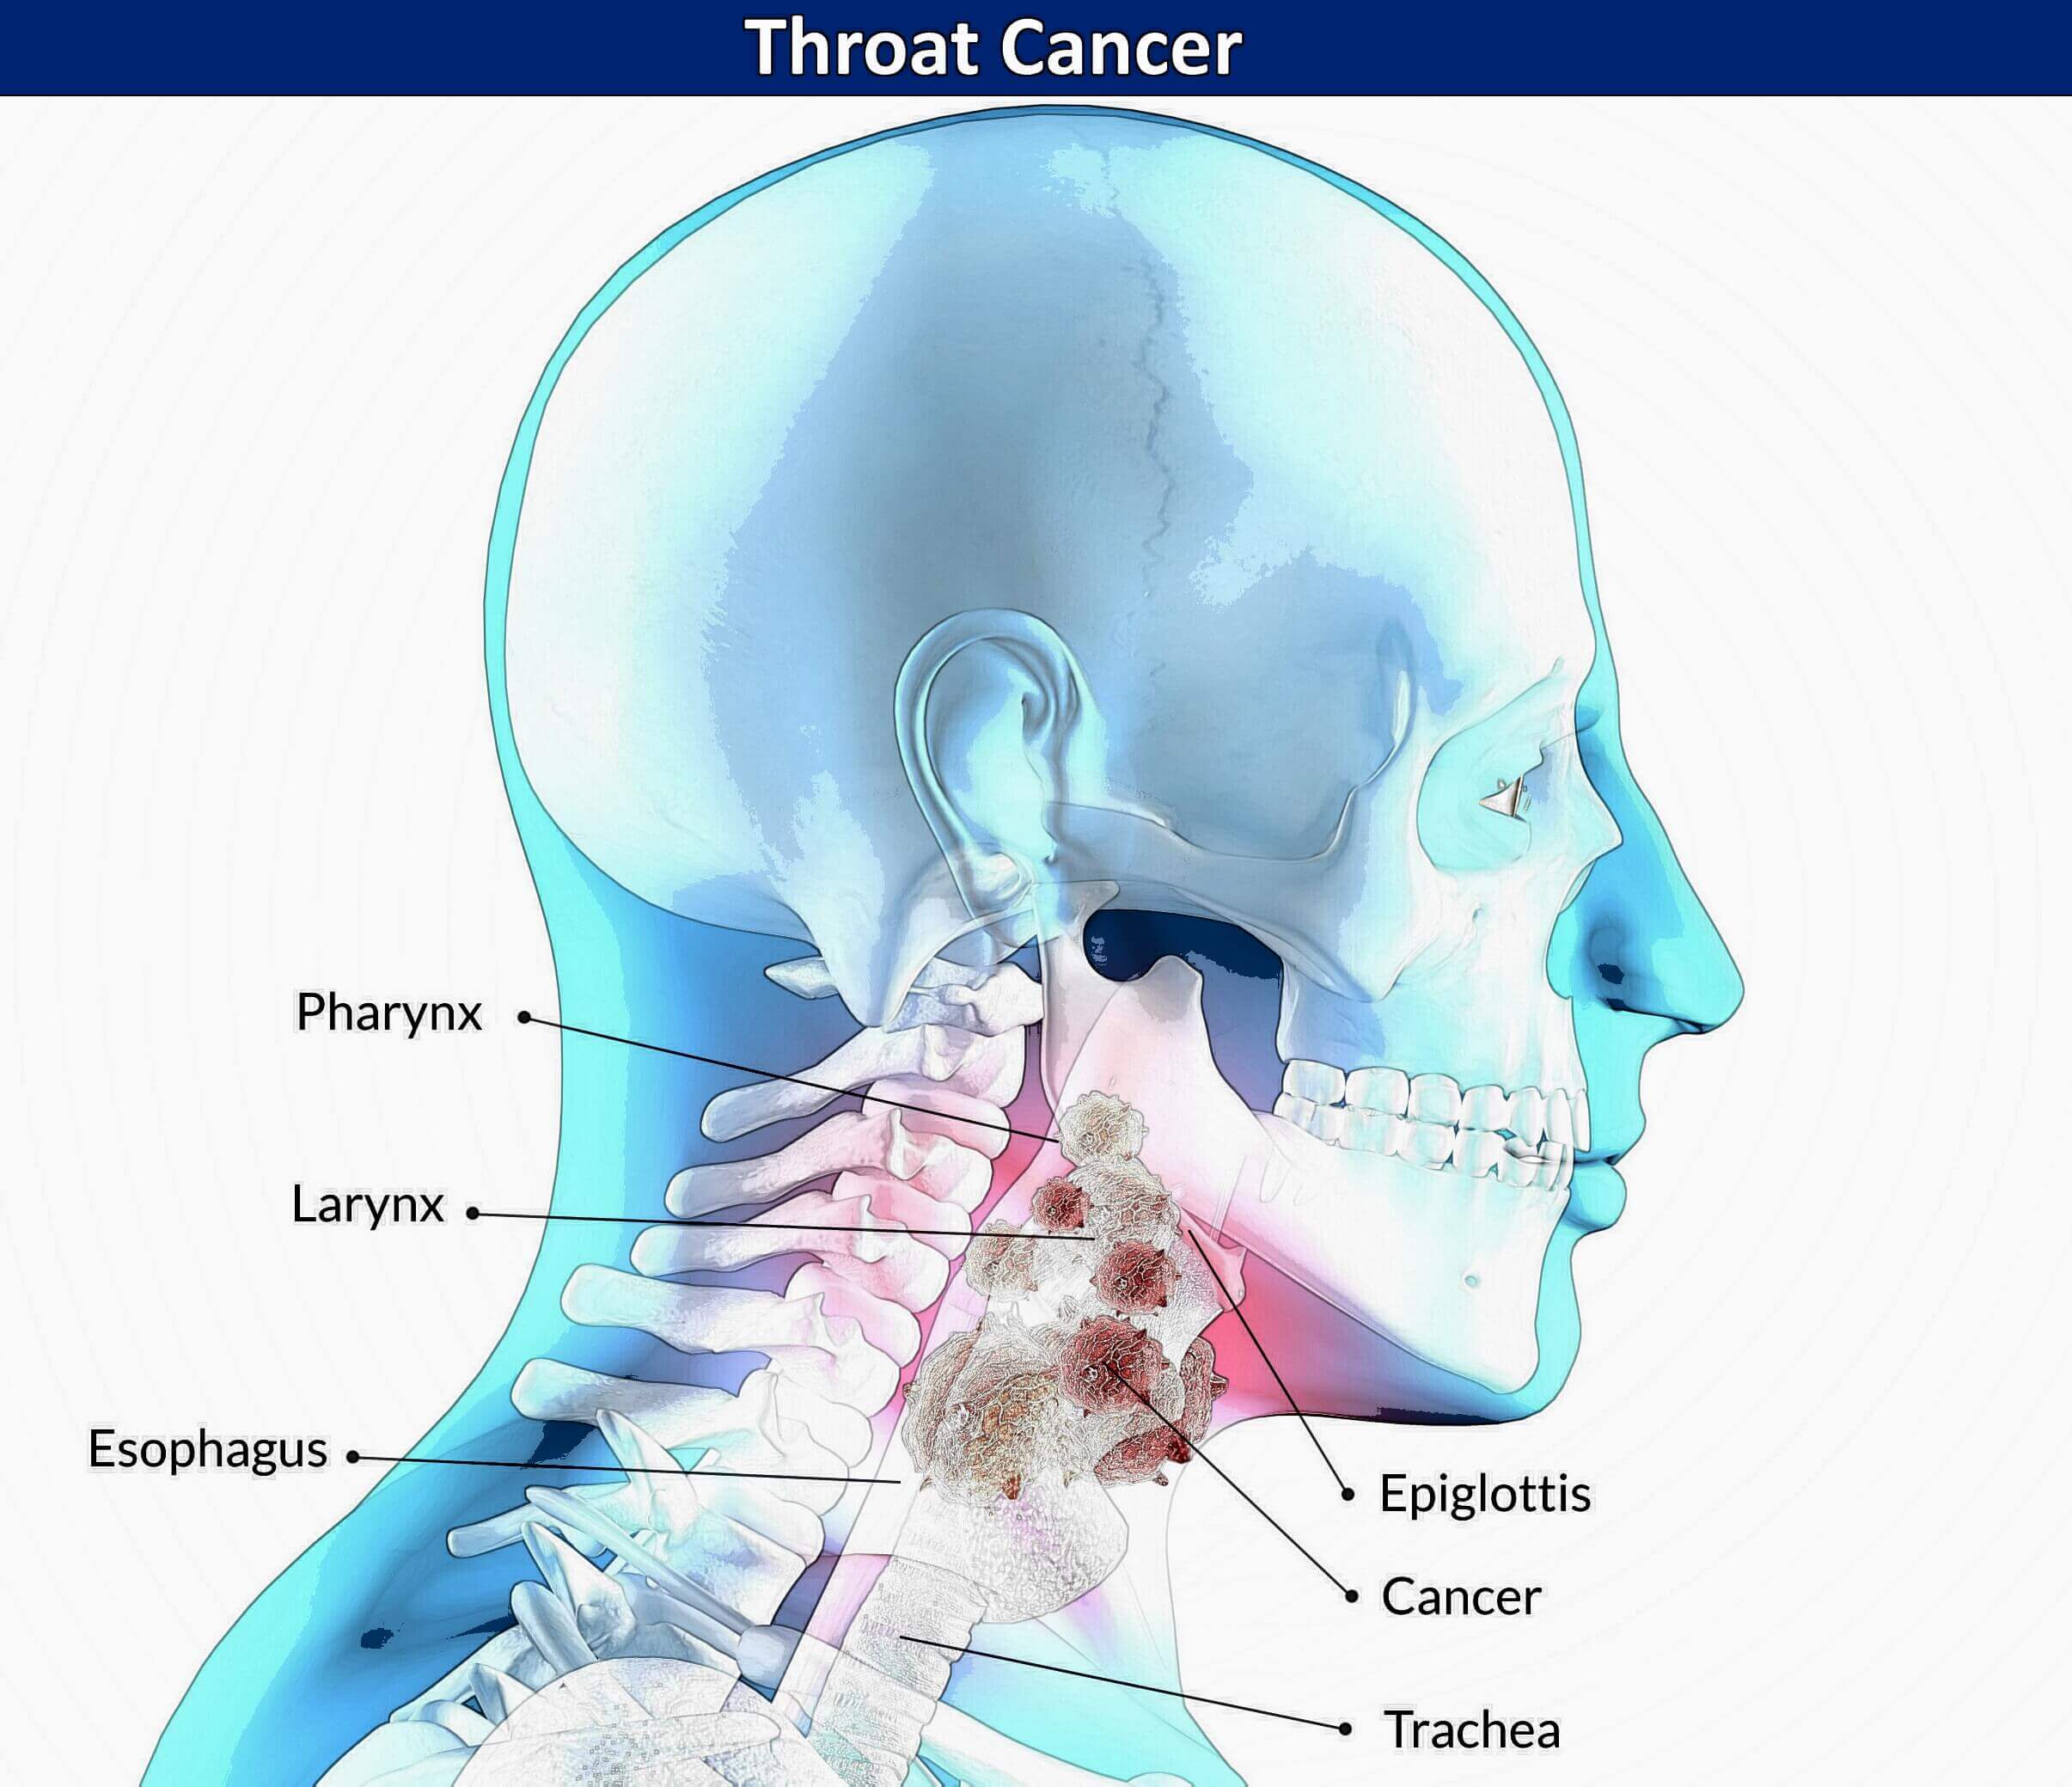 Diagramatic image of a head with area that throat cancer can develop